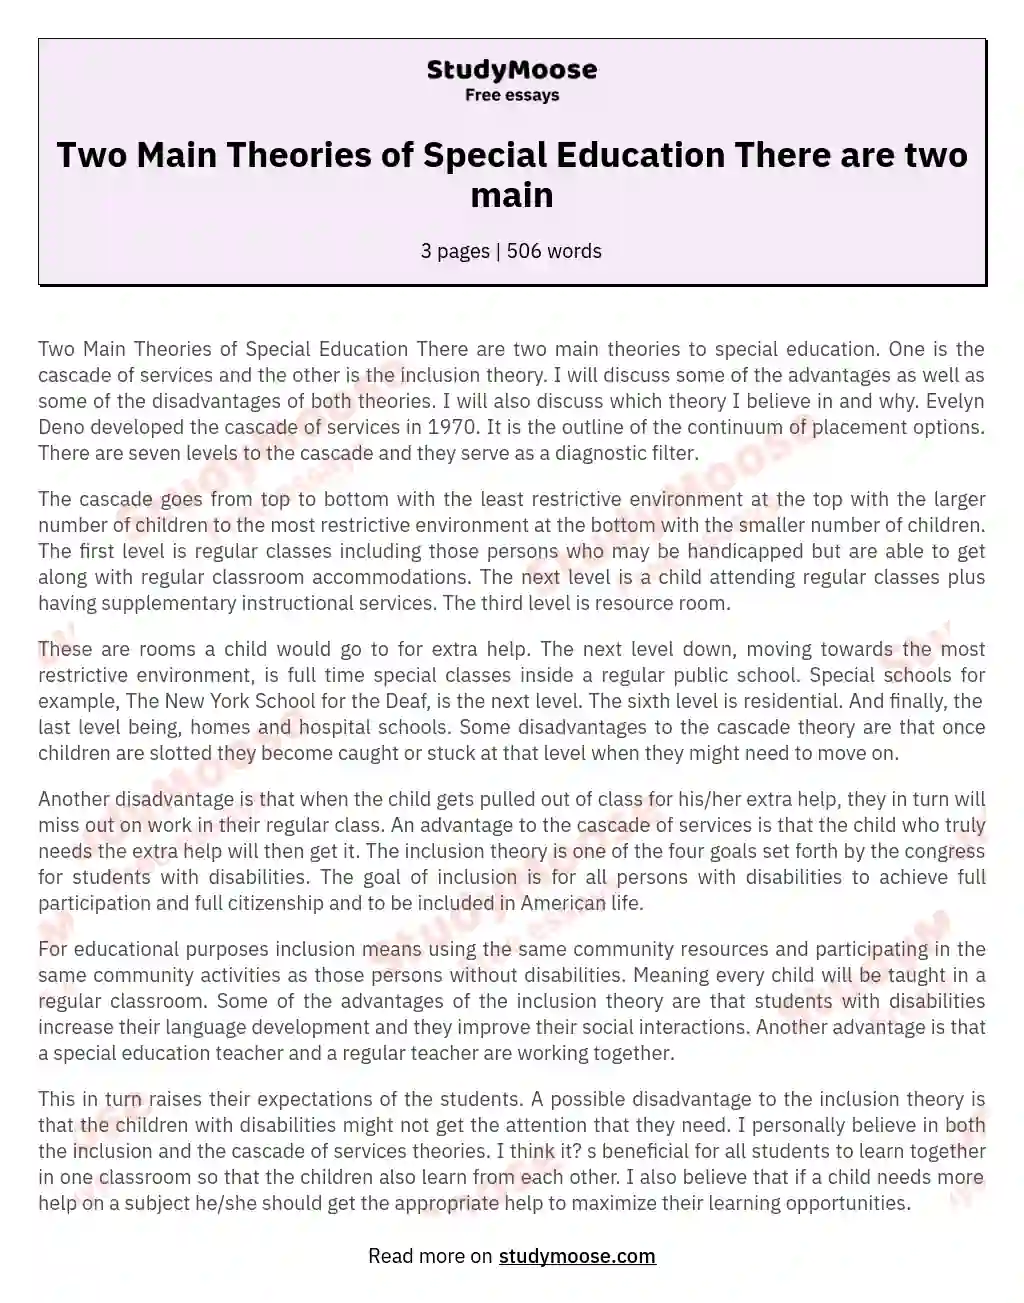 Two Main Theories of Special Education There are two main